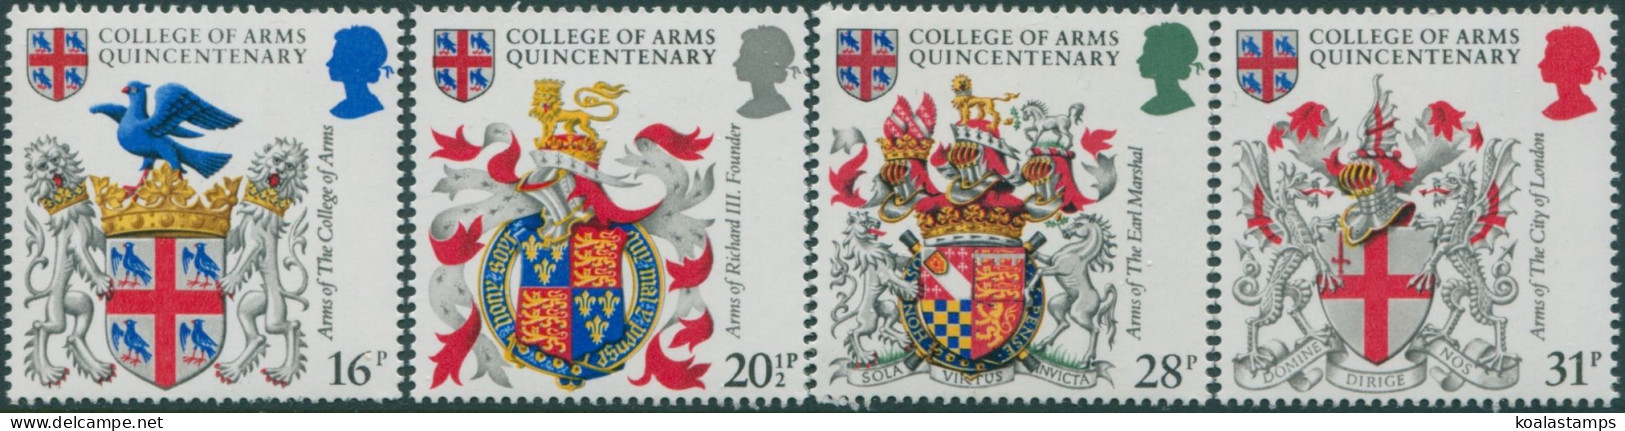 Great Britain 1984 SG1236-1239 QEII College Of Arms Set MNH - Ohne Zuordnung